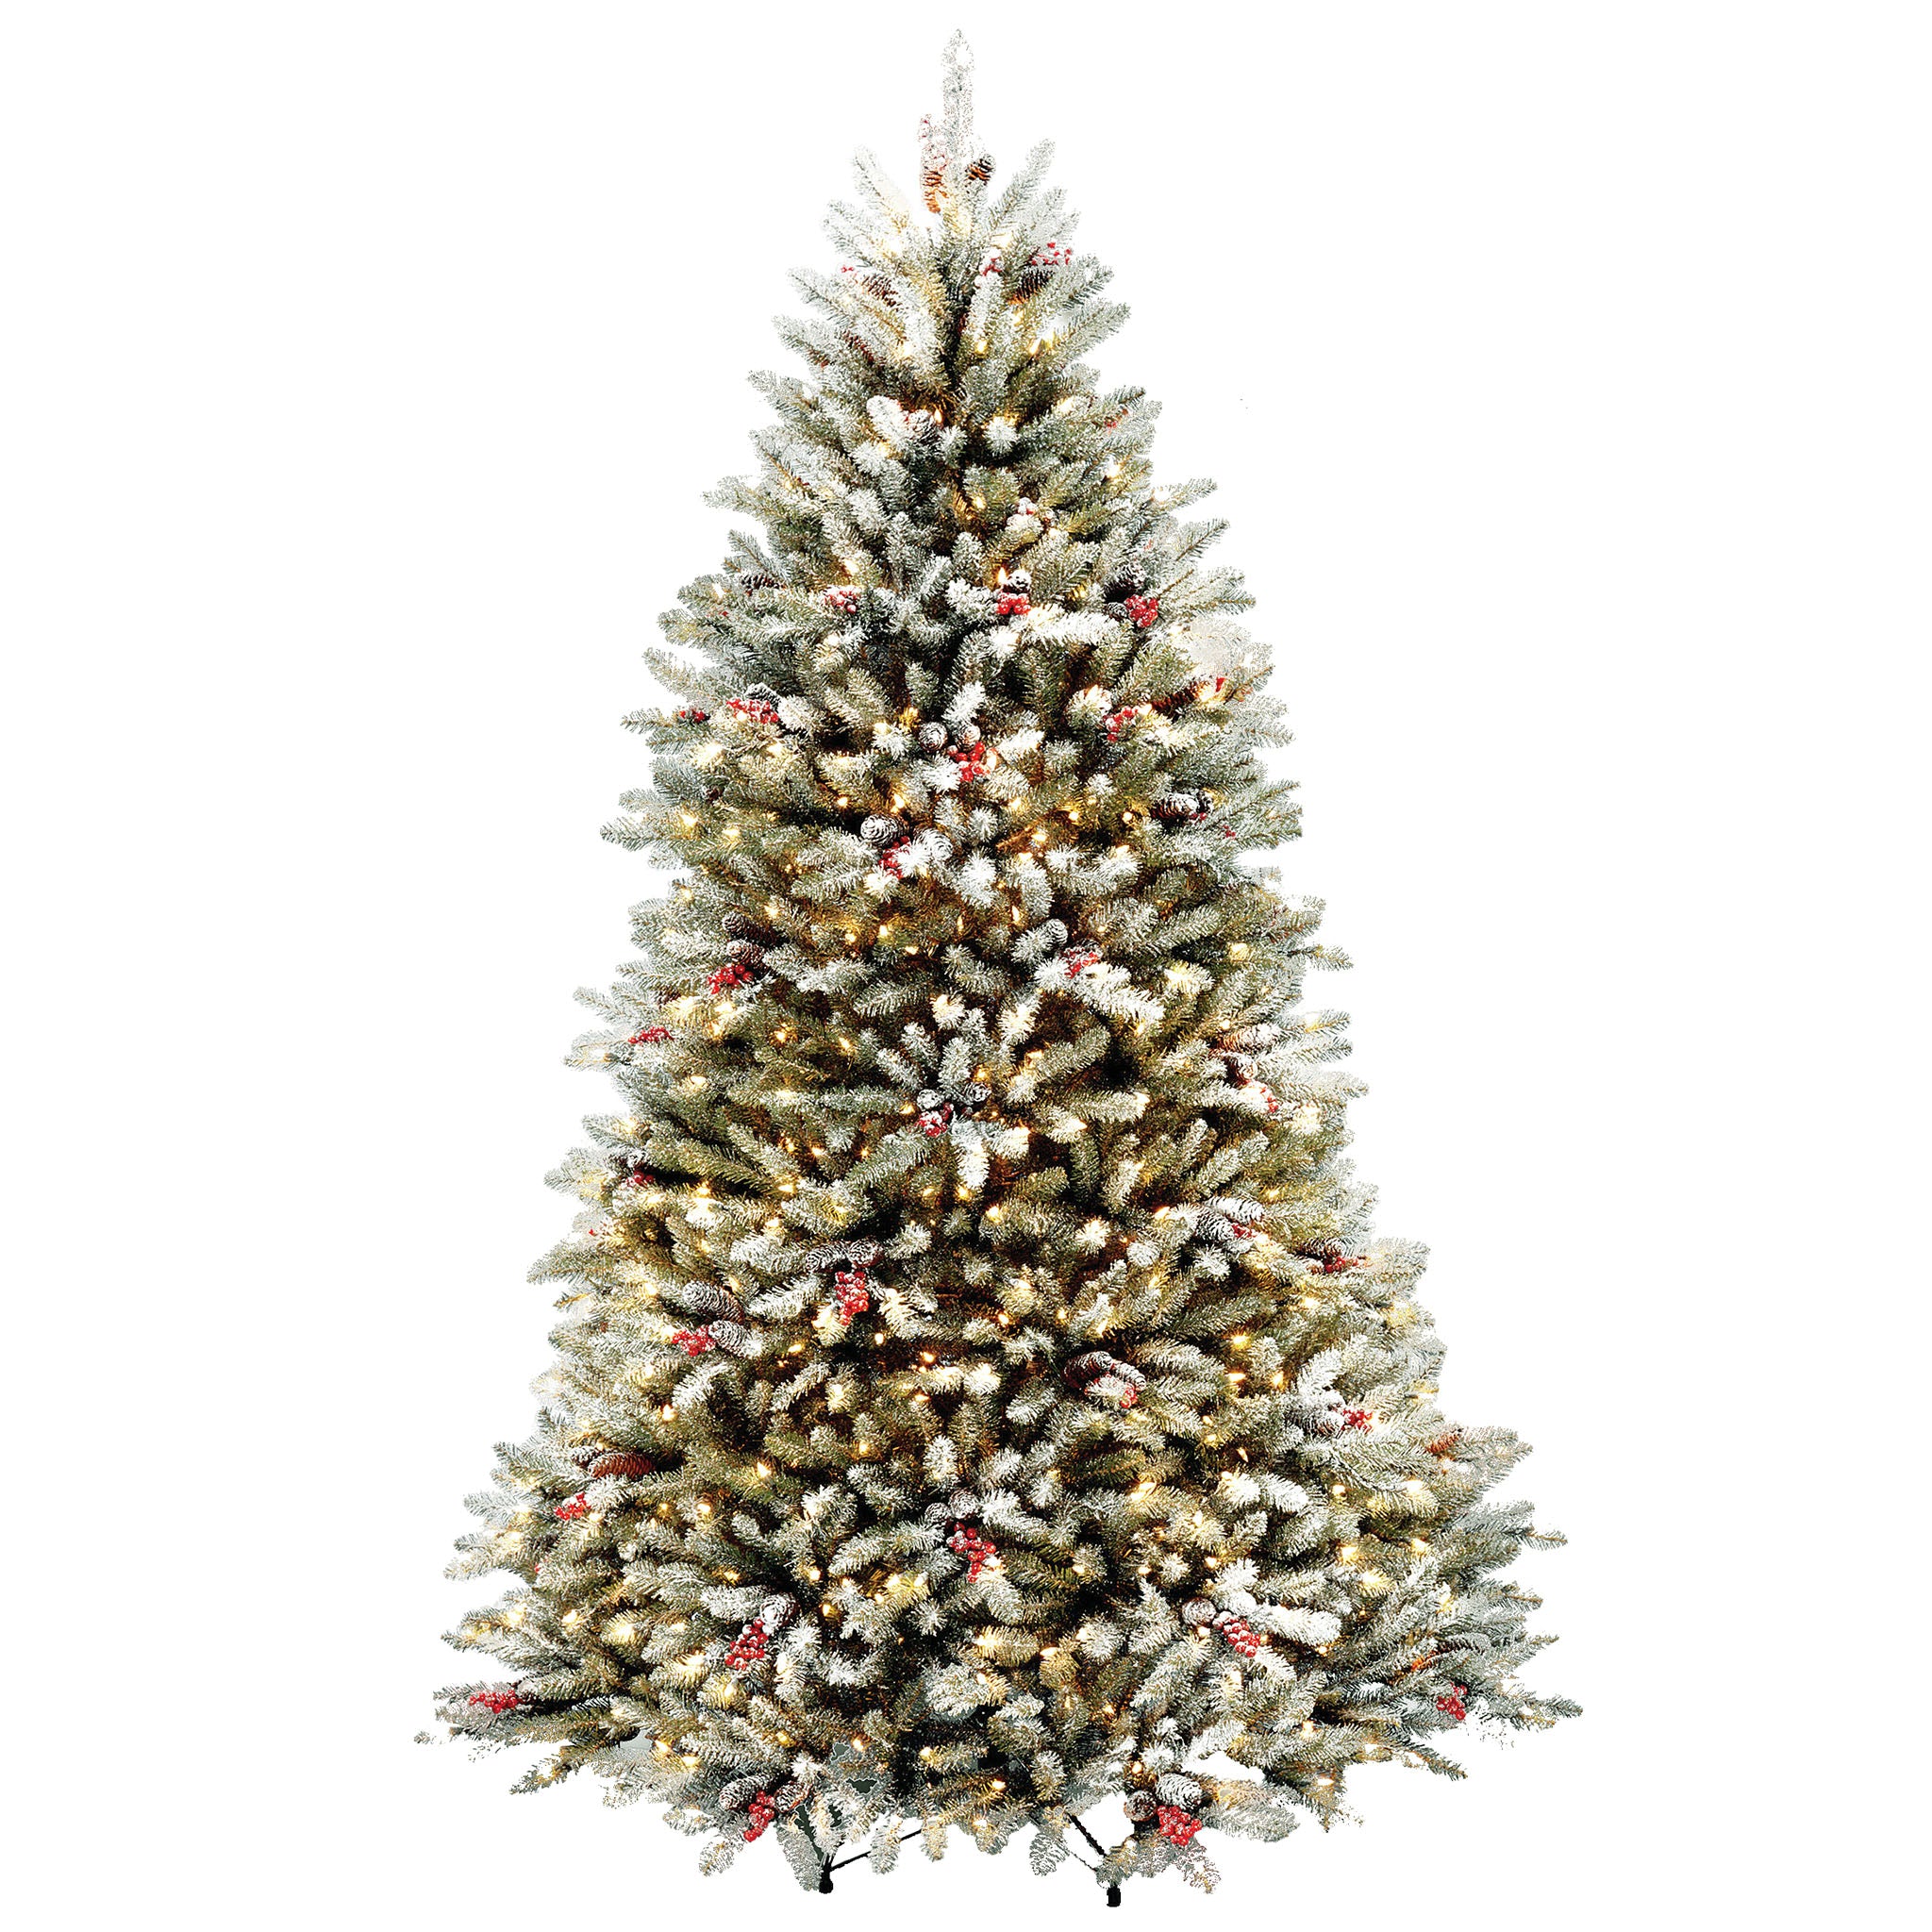 Pre-Lit Artificial Full Christmas Tree, Green, Dunhill Fir, White Lights, Decorated with Pine Cones, Berry Clusters, Frosted Branches, Includes Stand, 7.5 Feet